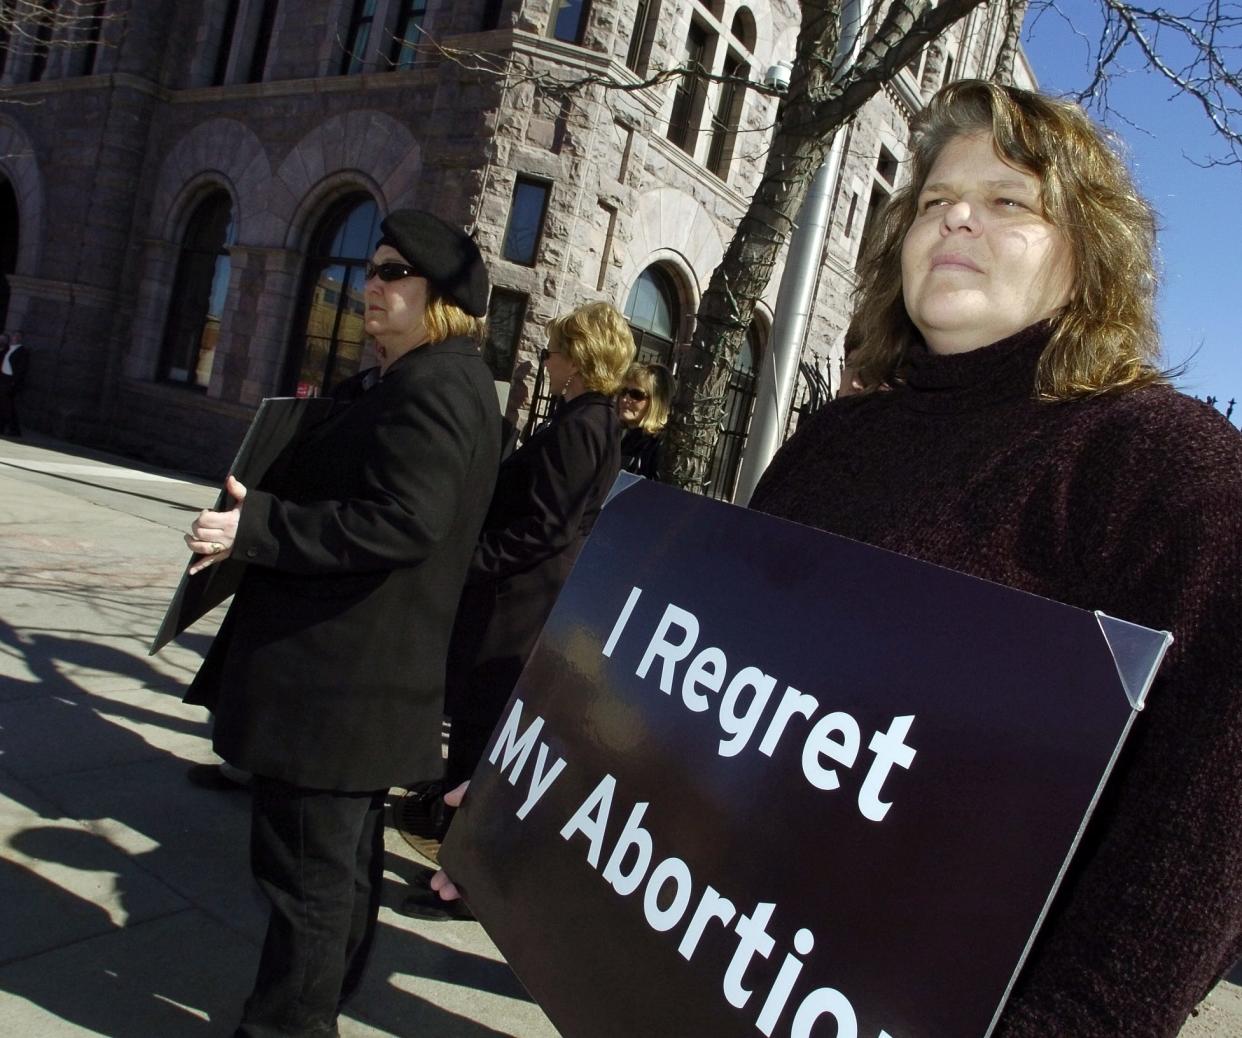 File photo: Deb Gute of Hartford says she regrets the abortion she had in 1988. "I used to be pro-choice and then I had an abortion. Dealing with the pain of knowing what I had done, it's really affected my life," Gute said in this 2006 photo.